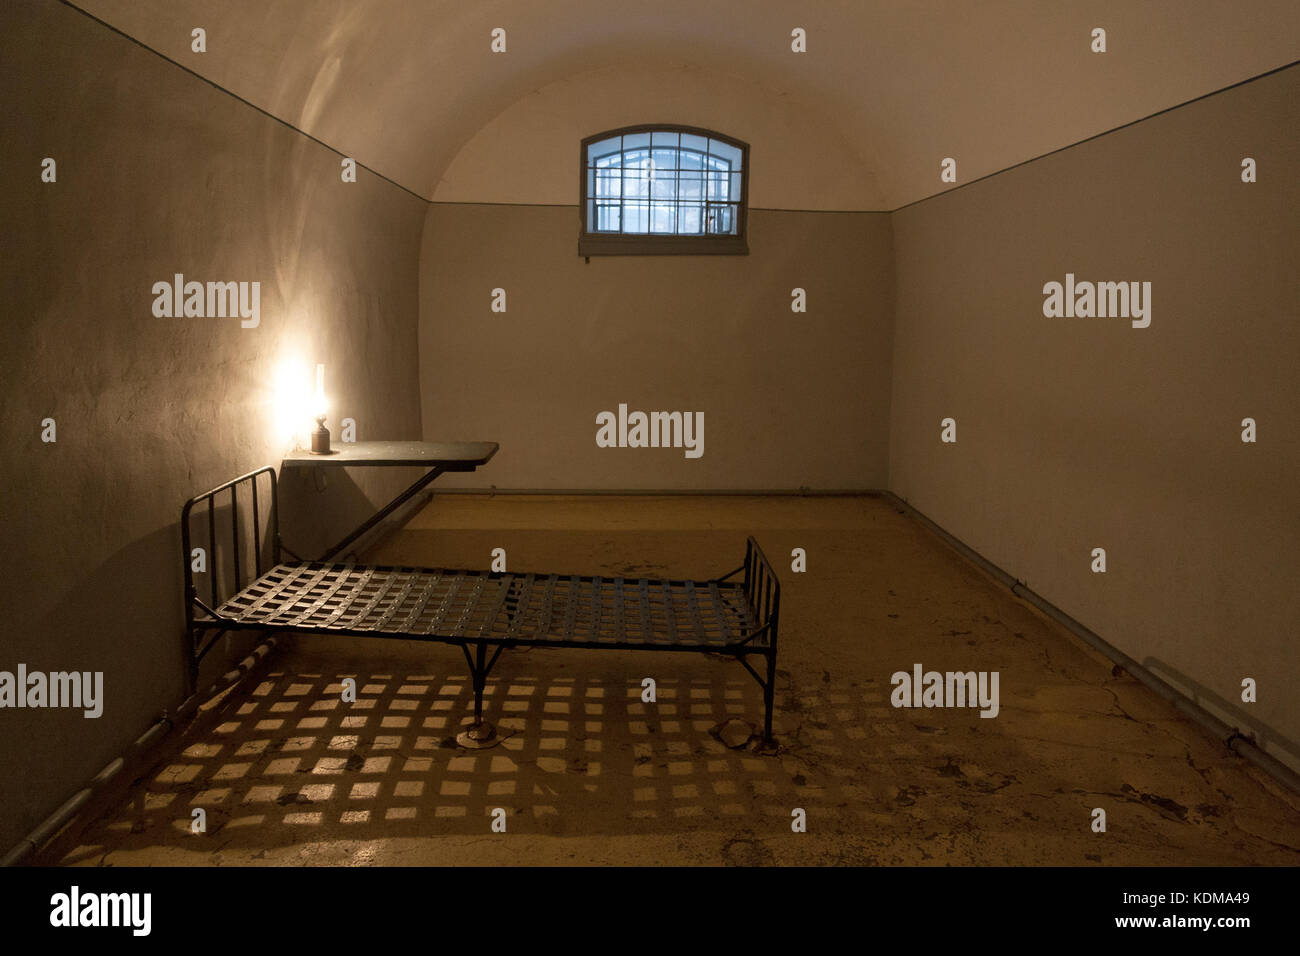 Old jail cell interior in the prison of Peter and Paul fortress in Saint Petersburg, Russia, with a little window, vintage lamp and iron bed. Stock Photo